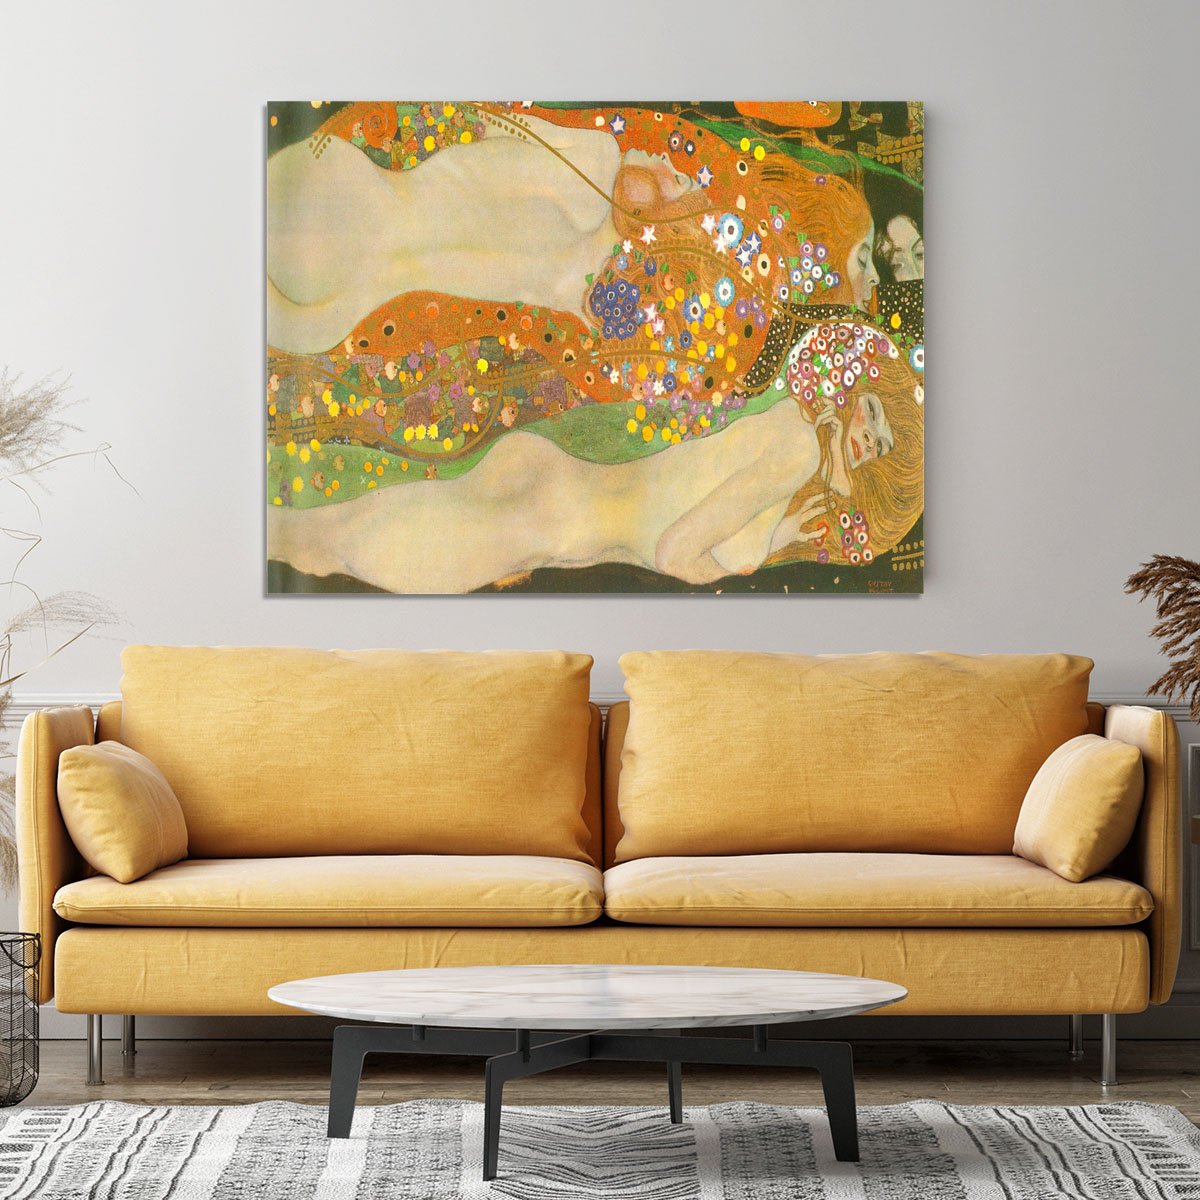 Water snakes friends II by Klimt Canvas Print or Poster